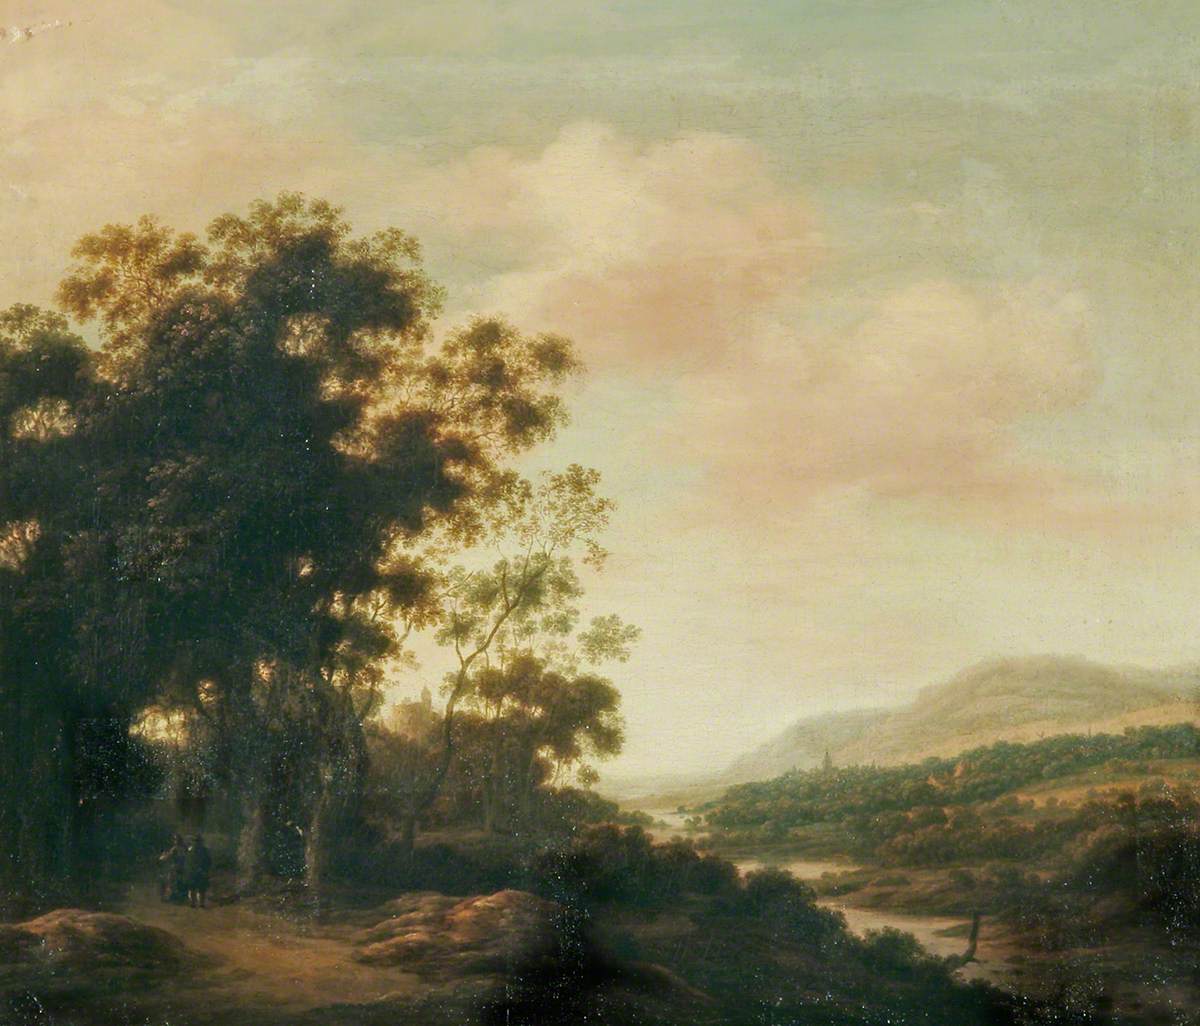 An Extensive River Landscape with Figures on a Road, a Wood to the Left